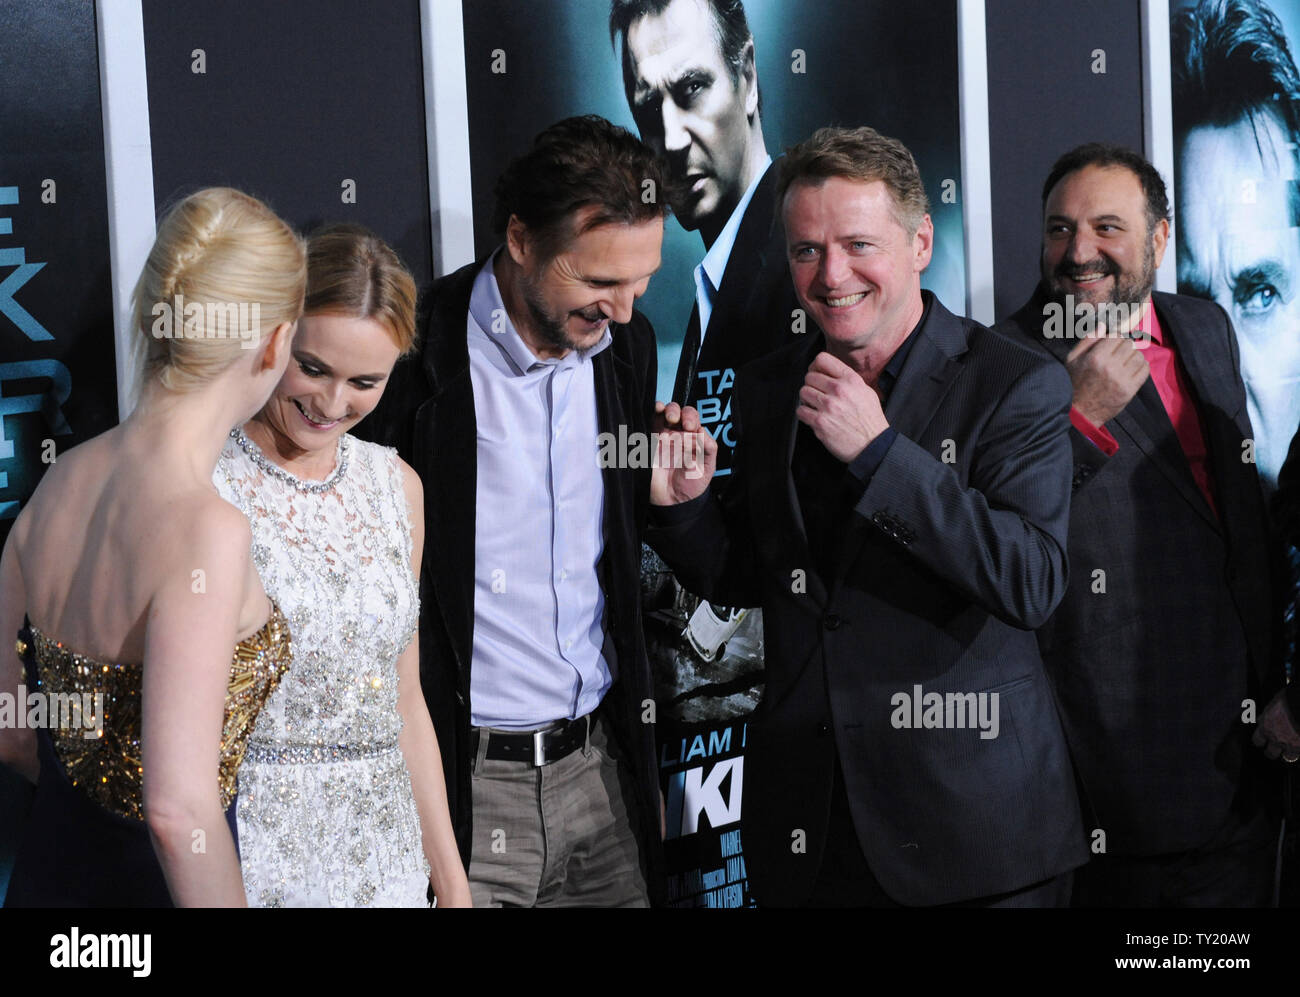 January Jones, Diane Kruger, Liam Neeson and Aidan Quinn (L-R), cast members in the motion picture thriller 'Unknown', share a laugh on the red carpet as producer Joel Sil;ver (R) looks on during the premiere of the film at The Mann Village Theatre in Los Angeles on February 16, 2011.  UPI/Jim Ruymen Stock Photo